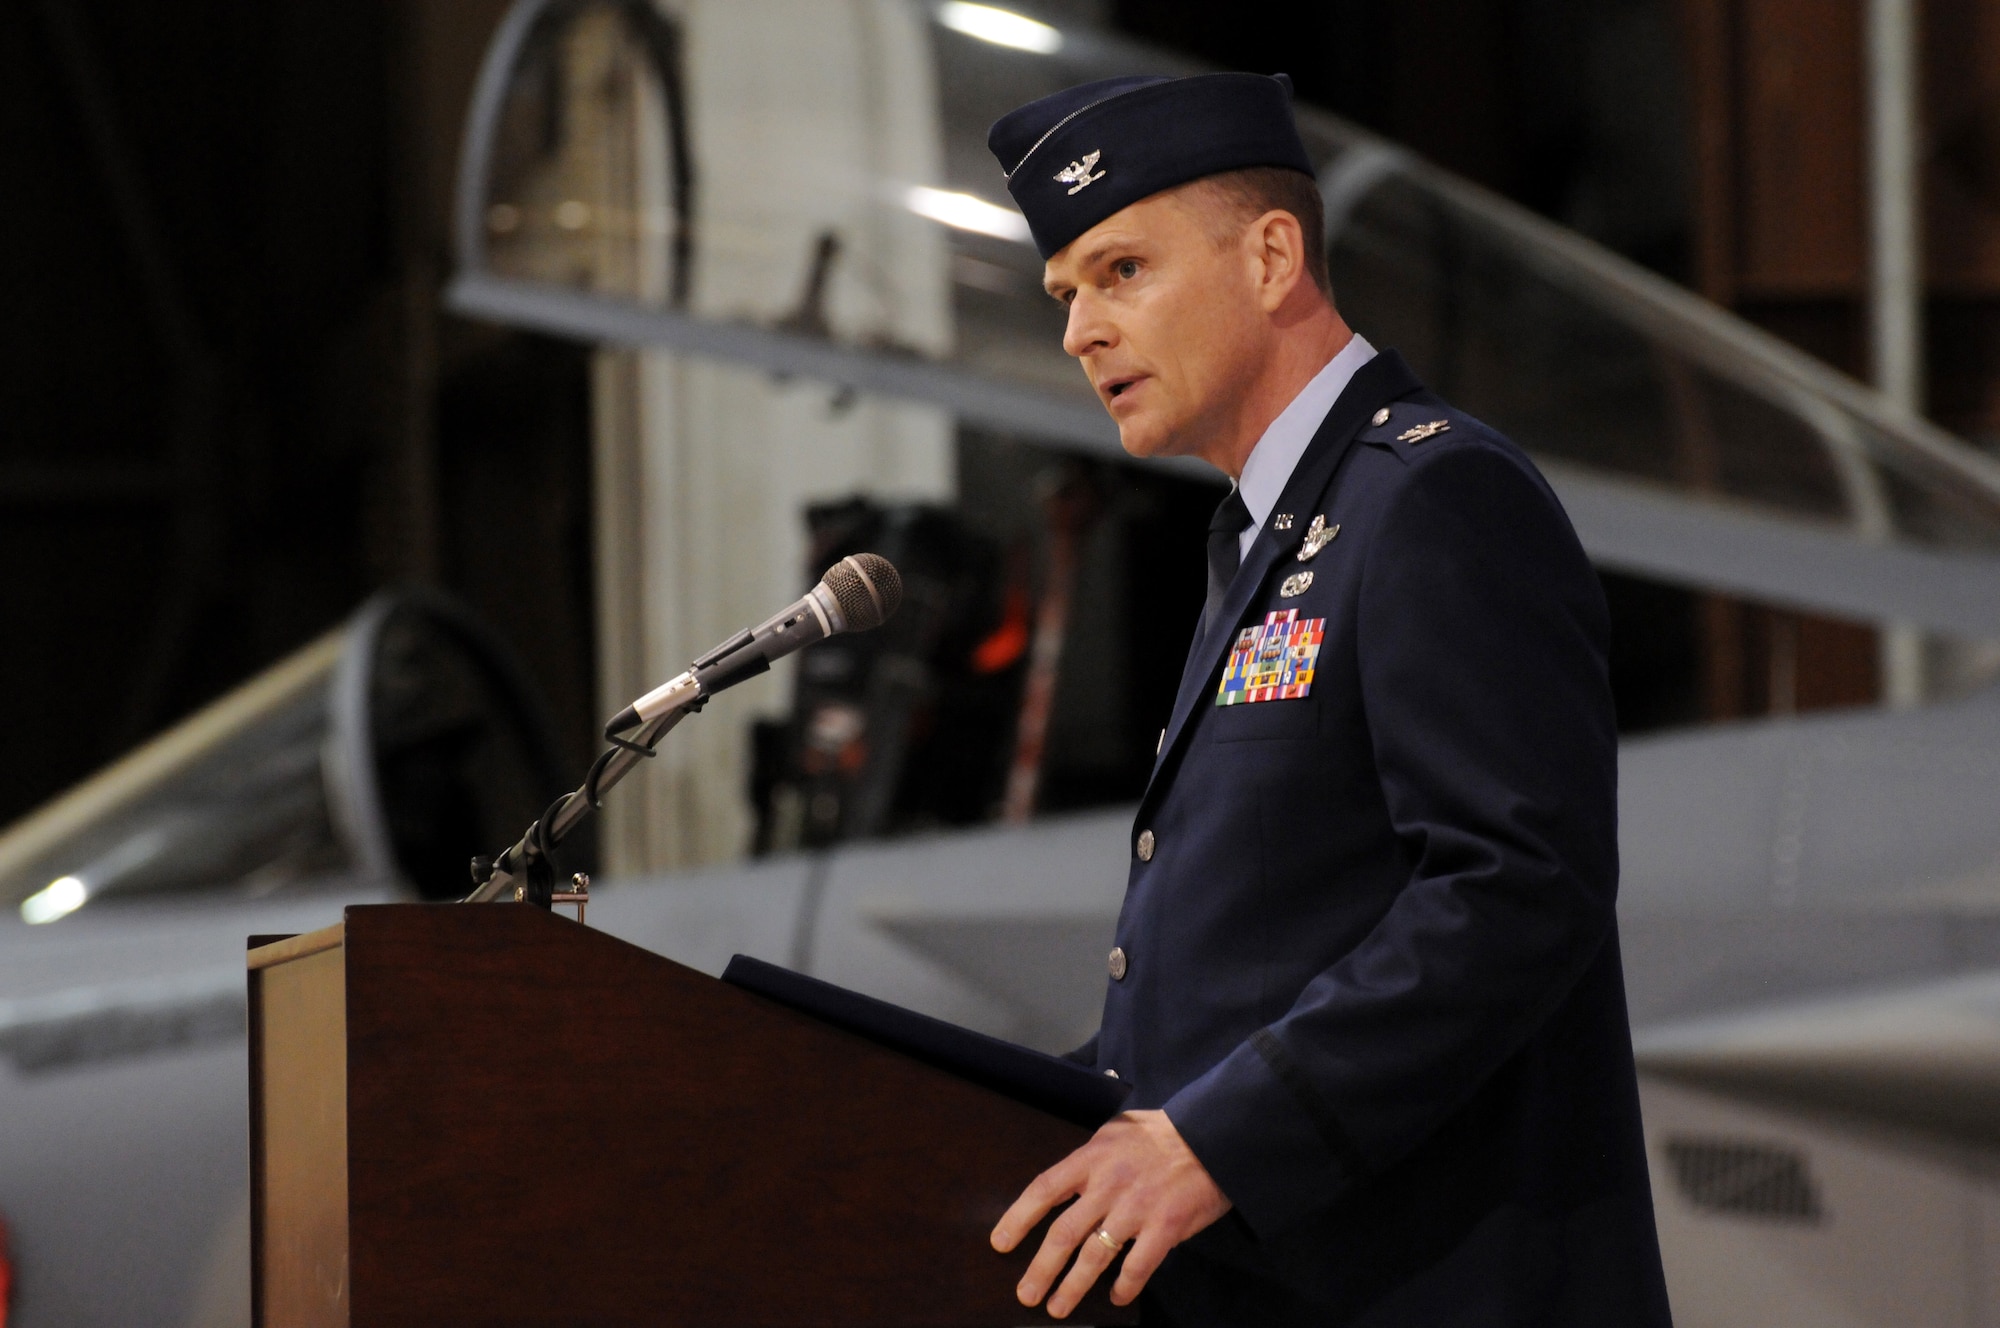 Oregon Air National Guard Col. Richard Wedan addresses attendees at the 142nd Fighter Wing Change of Command ceremony, held at the Portland Air National Guard Base in Portland, Ore., Dec. 2. Wedan assumes command from Col. Michael E. Stencel, who had commanded the Wing for the past three years. (U.S. Air Force photo by Tech. Sgt. John Hughel, 142nd Fighter Wing Public Affairs / released.)